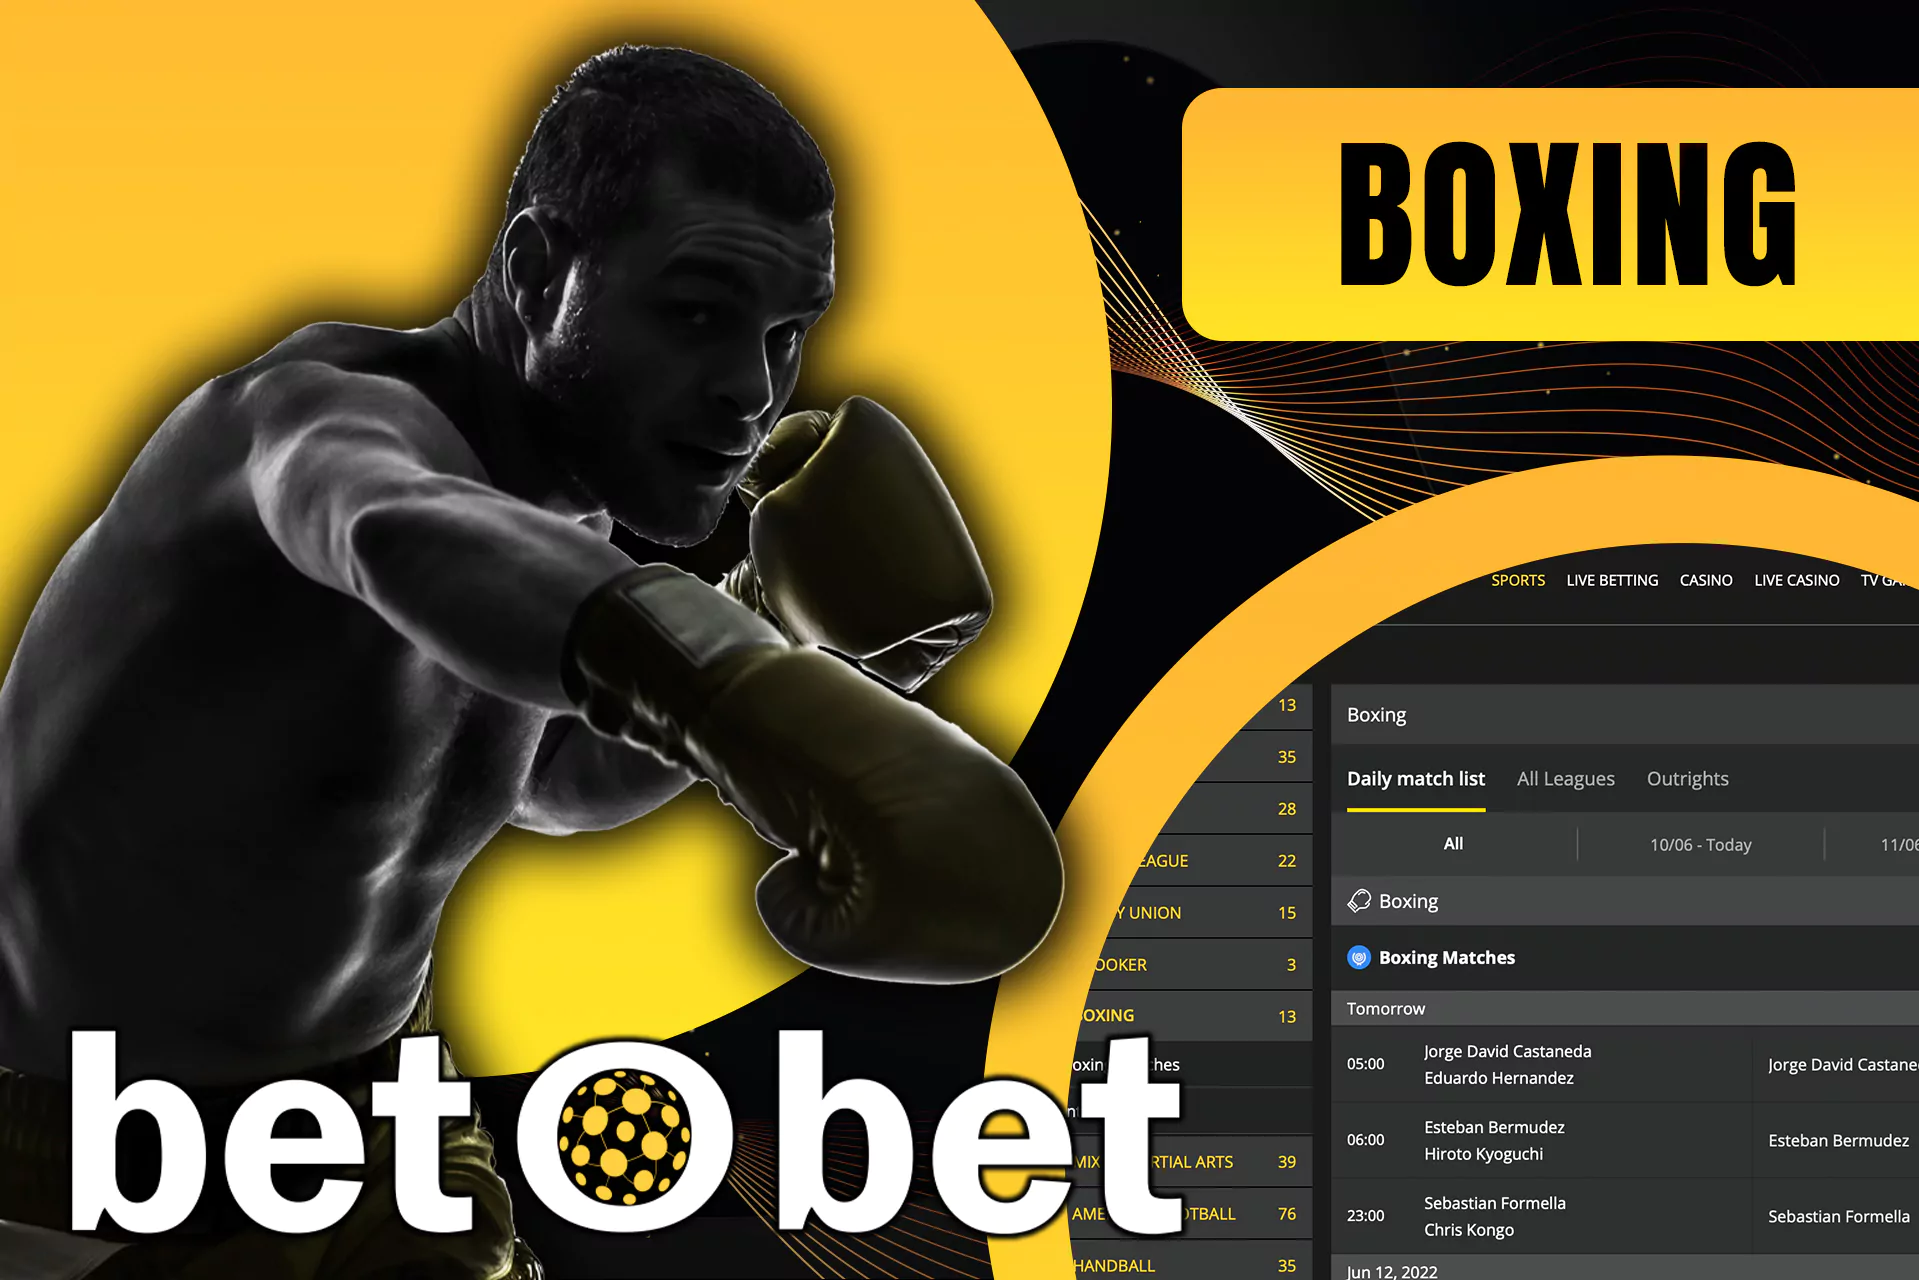 Boxing is also among the betting options at Bet O Bet.